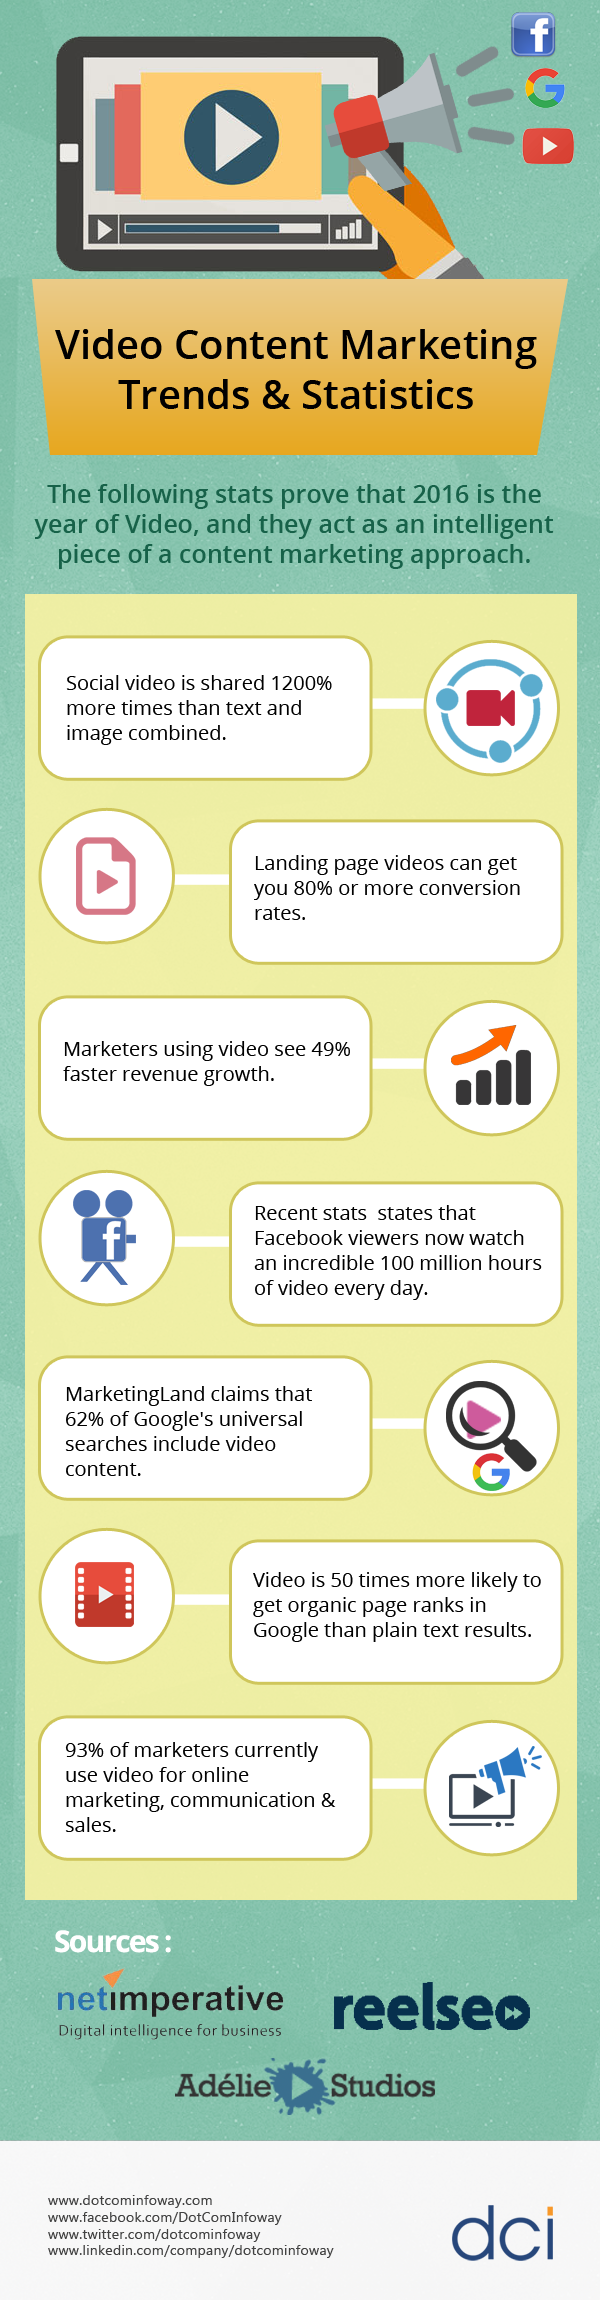 Video Content Marketing Trends